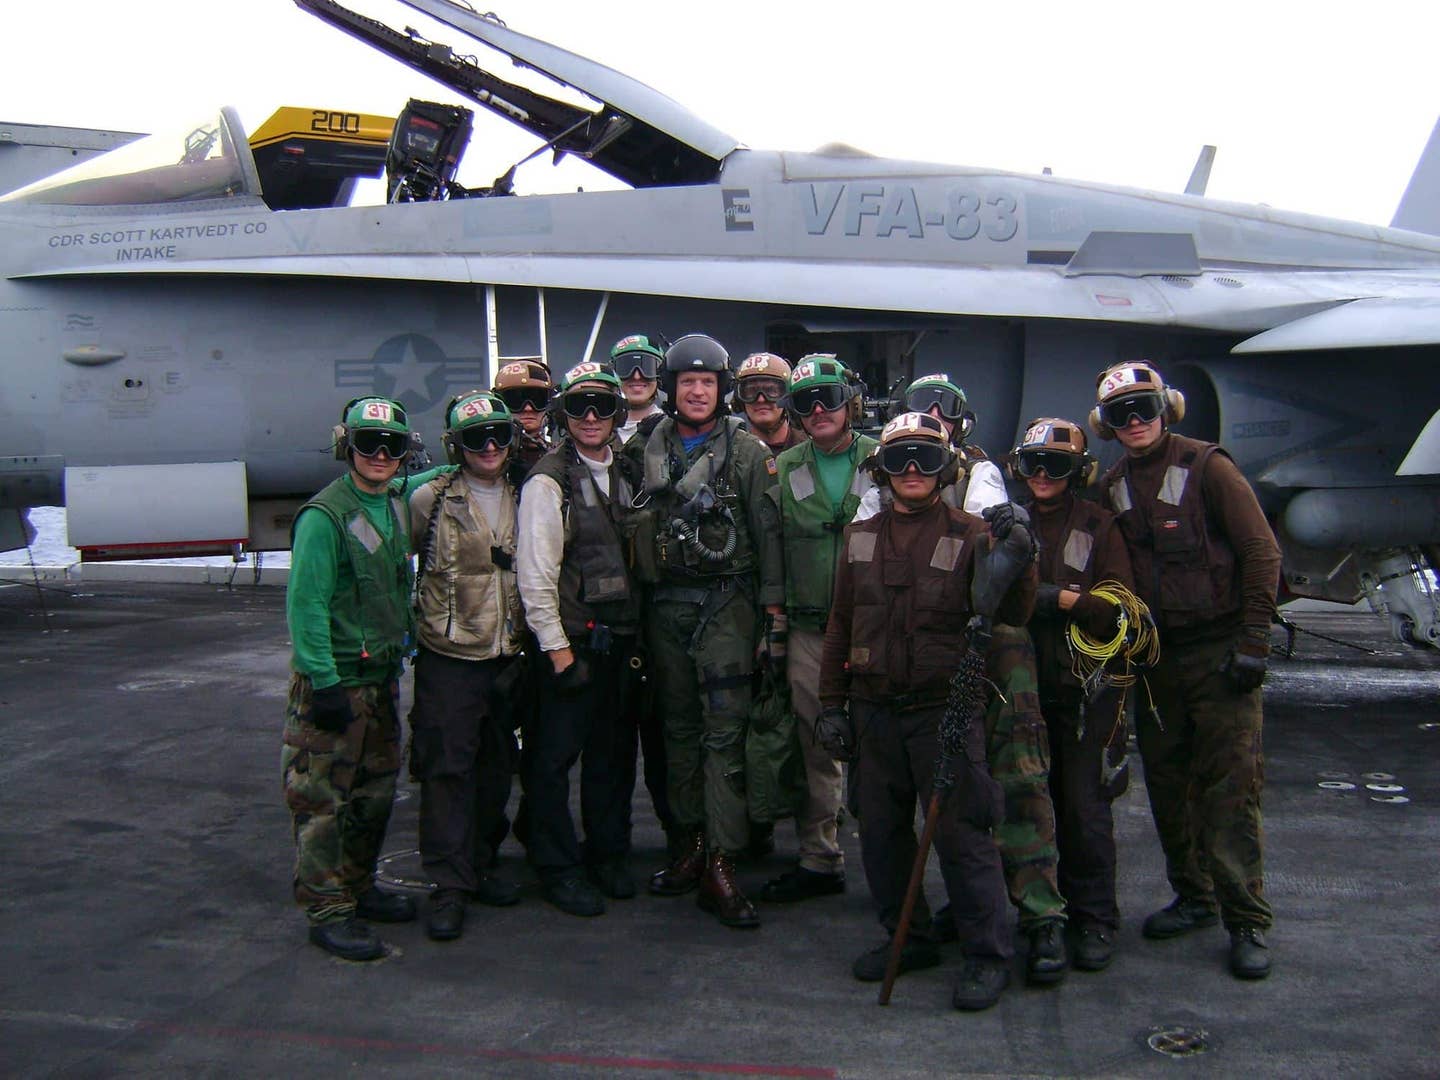 Scott with ground crew on the boat, his F/A-18 wearing the Battle E award insignia. (Scott "Intake"<br>Kartvedt)